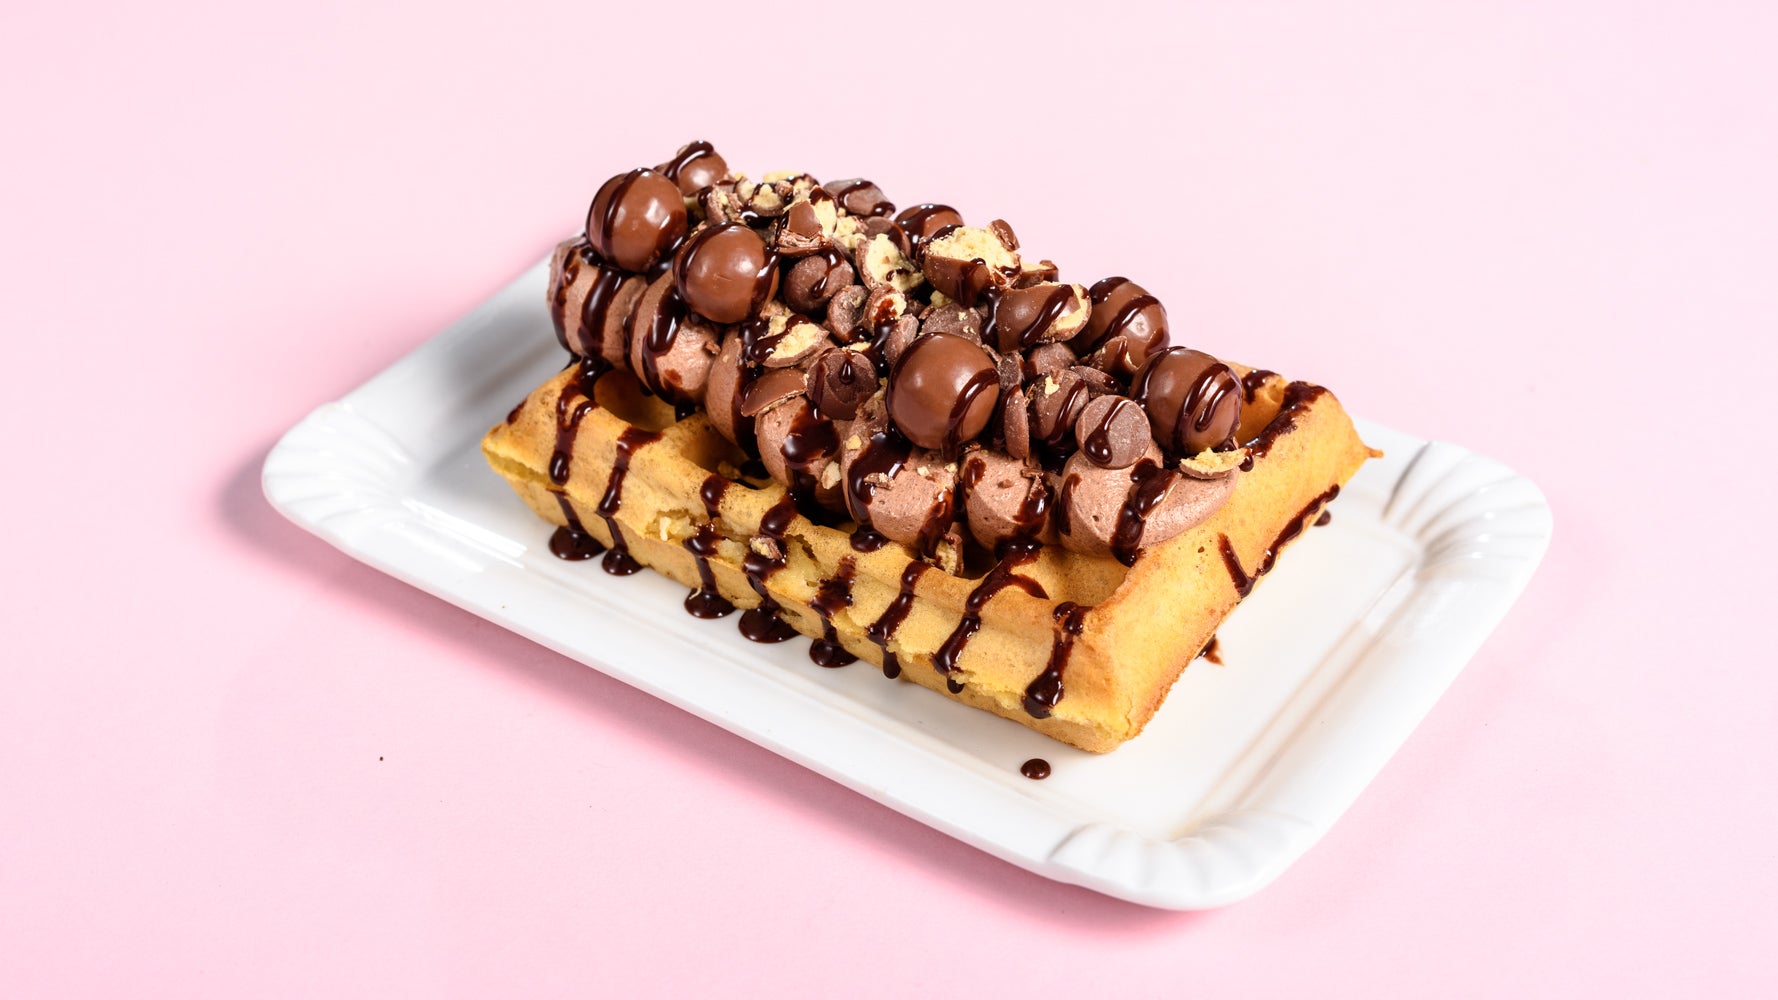 The Bournville Waffle